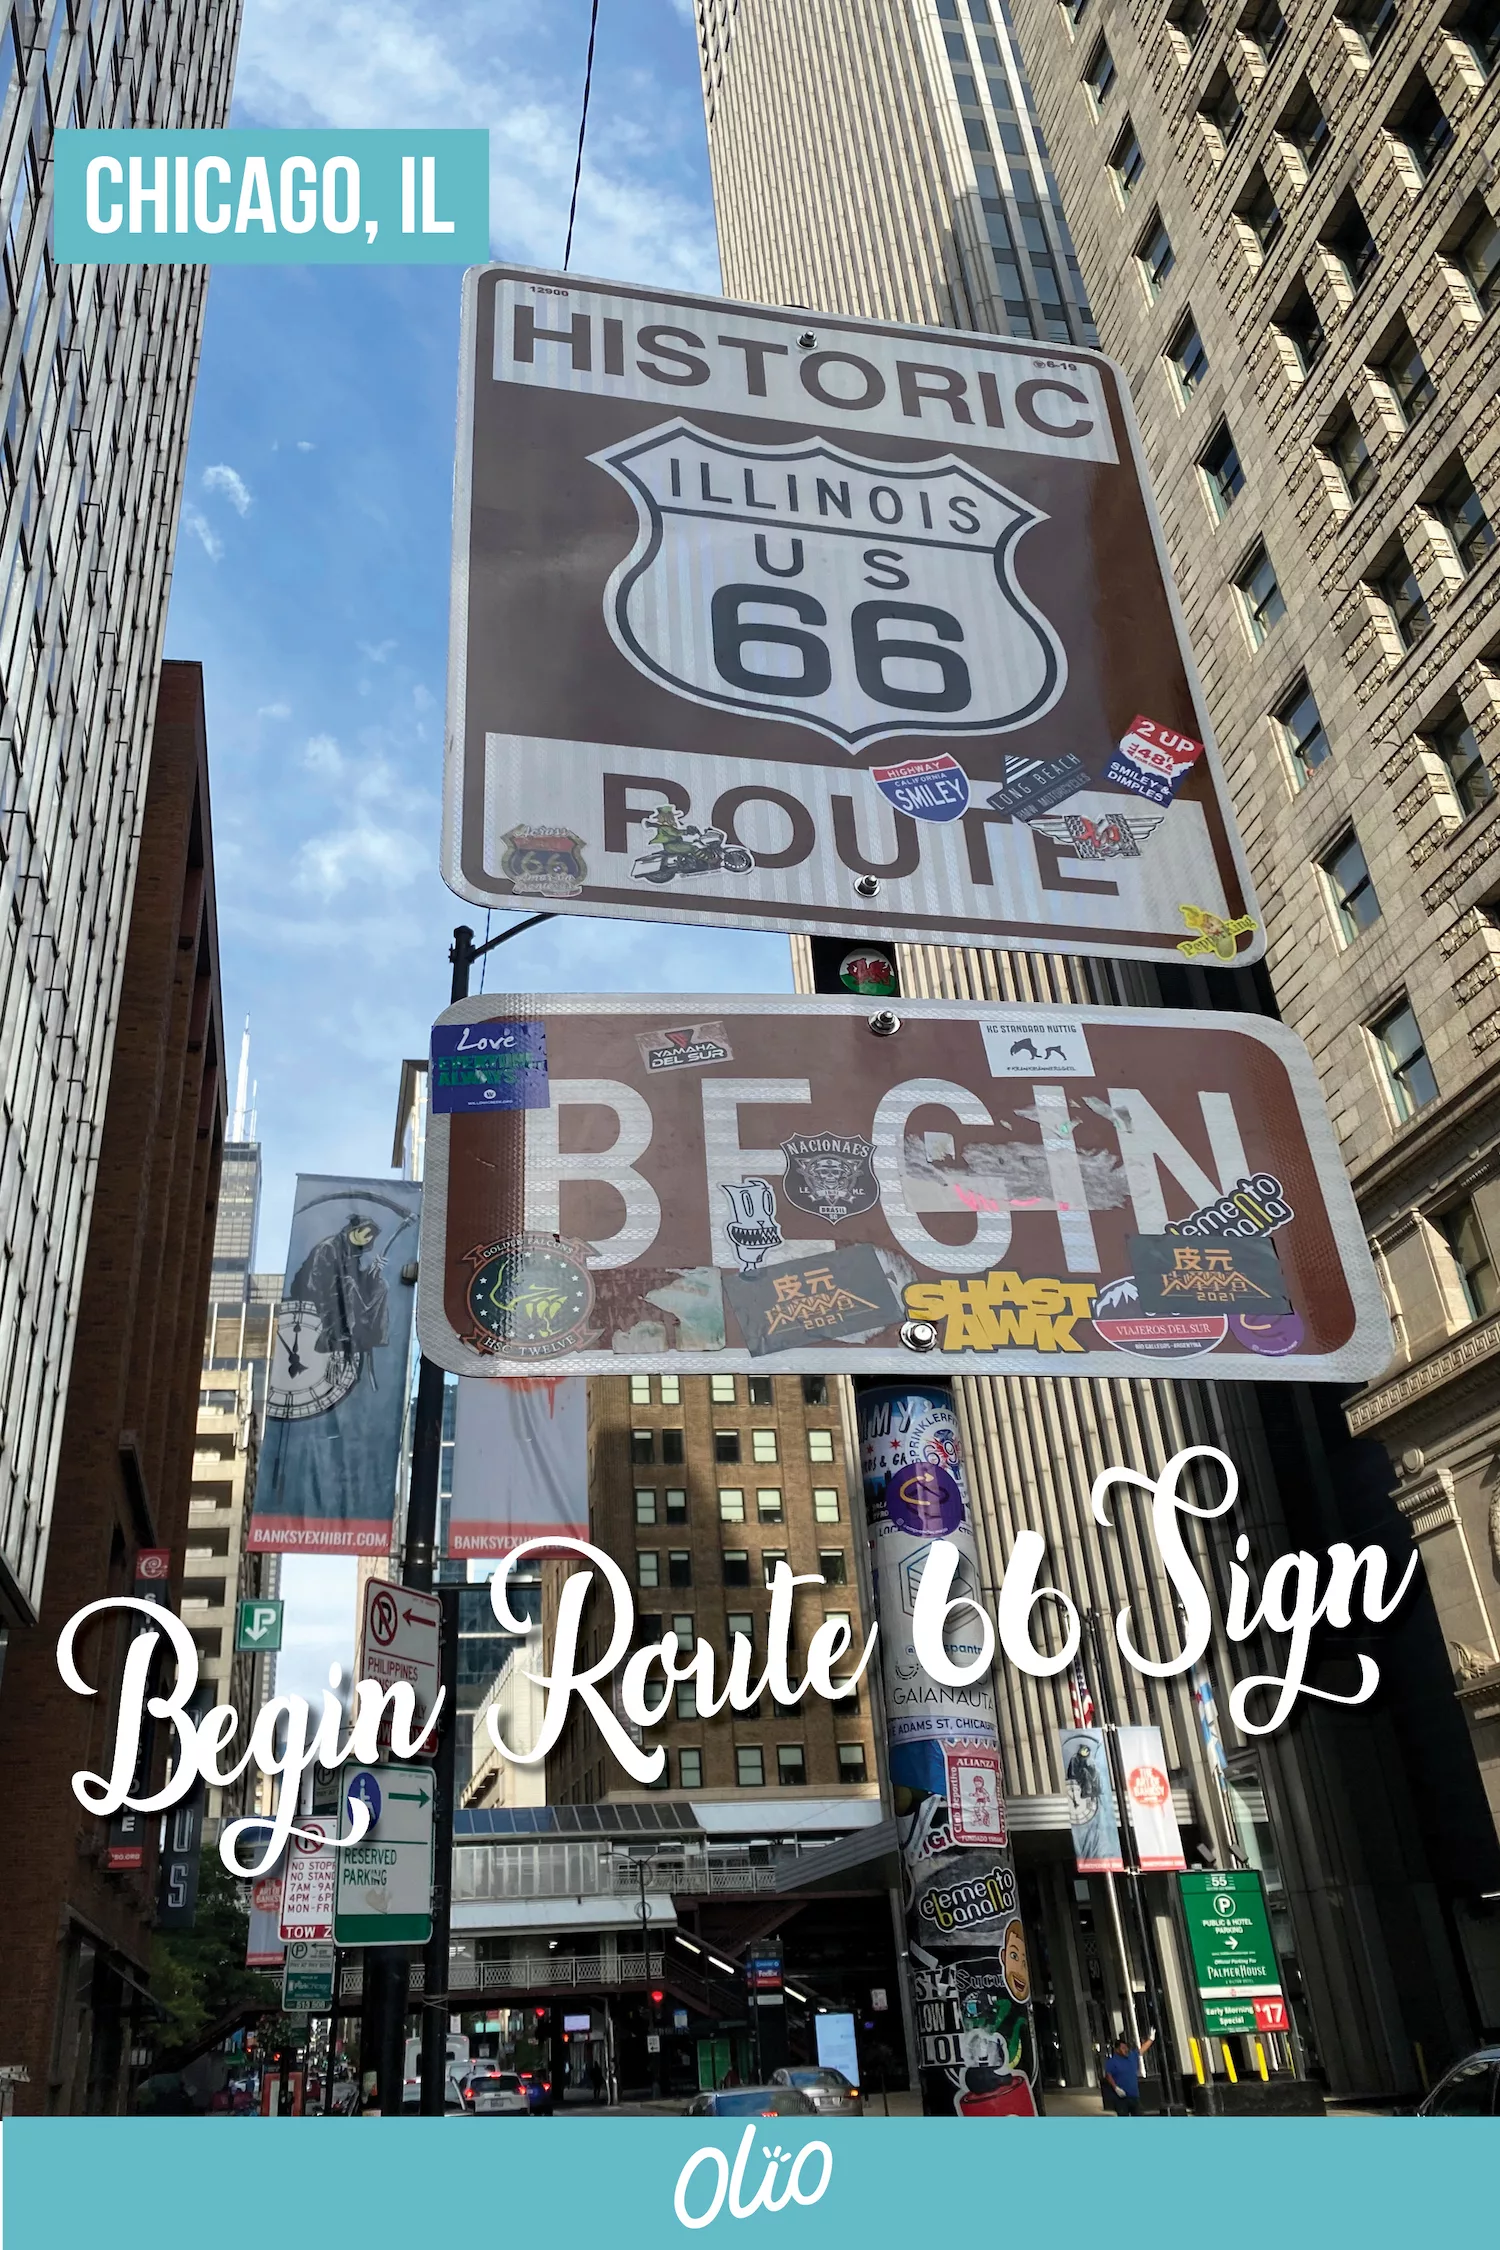 Start your epic adventure on Route 66 at the historic trail Begin Route 66 sign in downtown Chicago, Illinois! While the location of the starting point of the Mother Road has moved a number of times throughout its history, today it can be found at E. Adams Street and Michigan Avenue. #Illinois #Route66 #Chicago